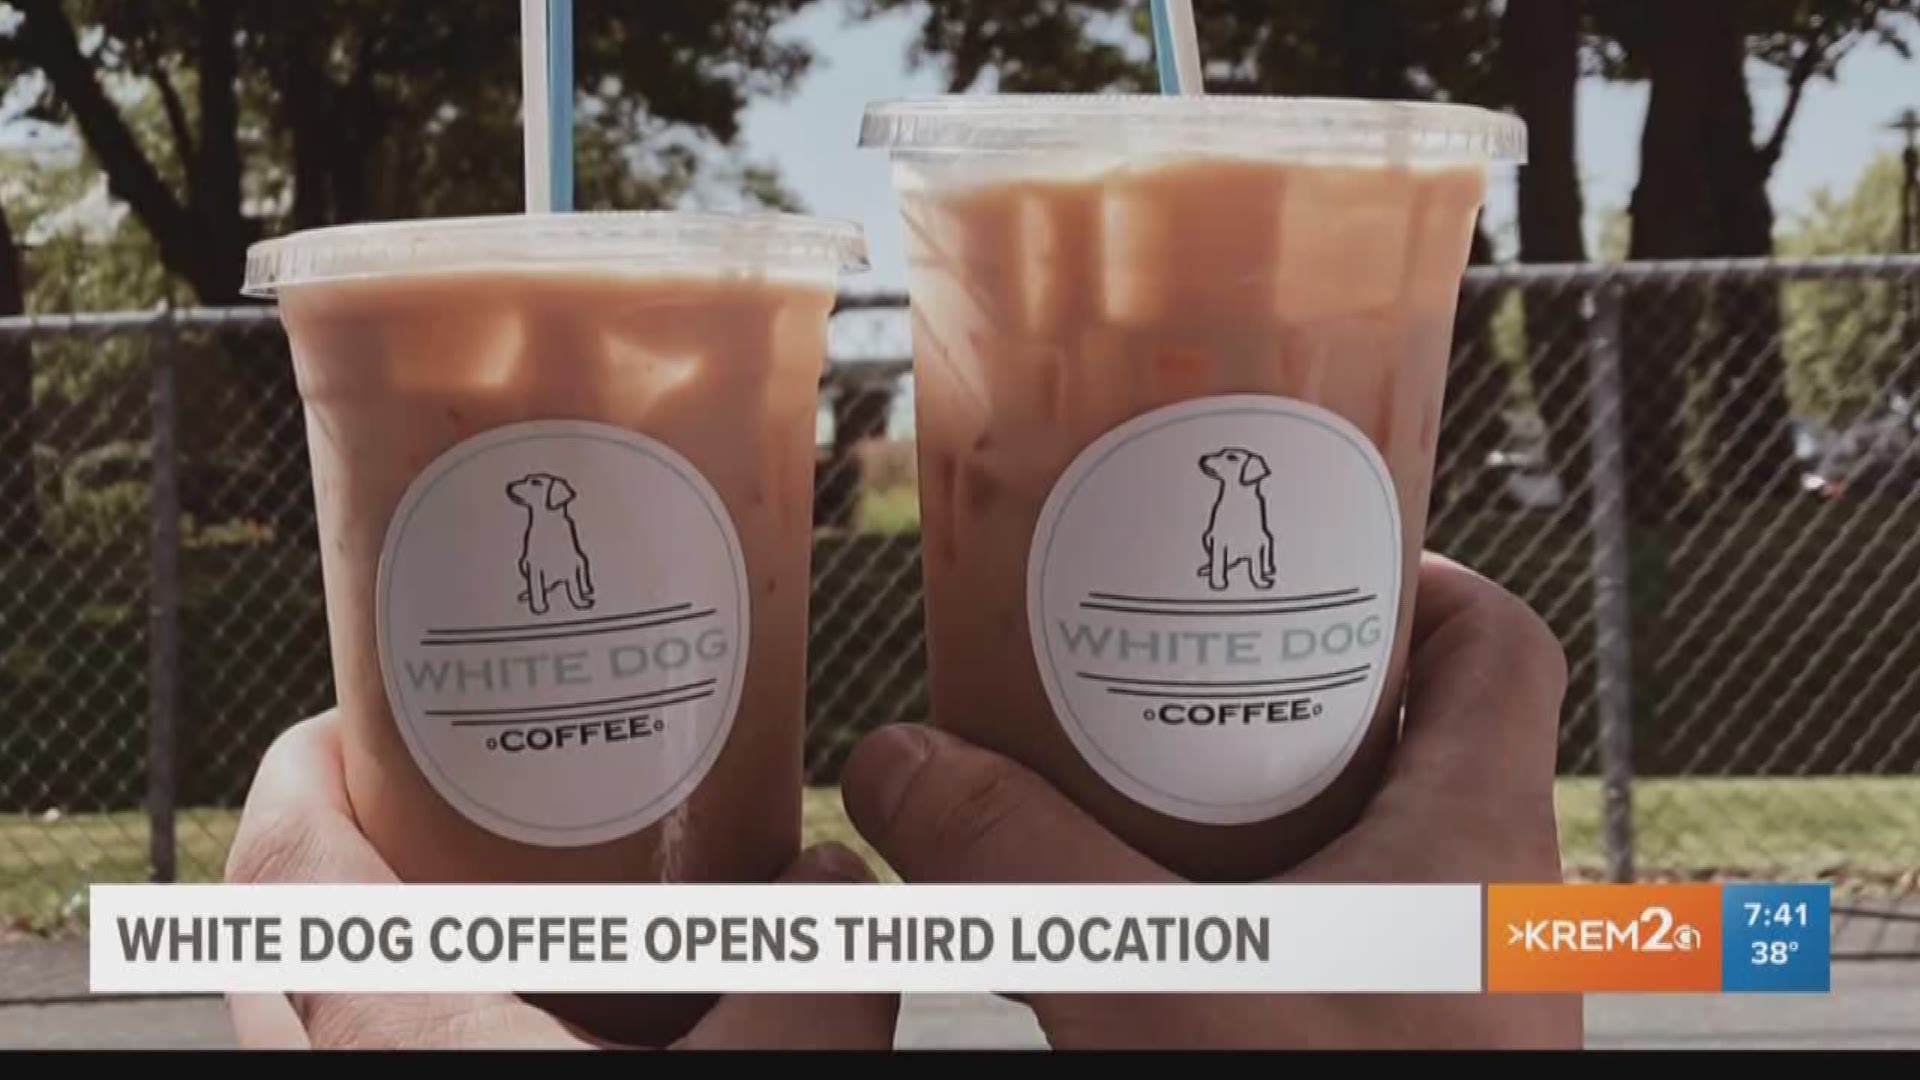 White Dog Coffee is a locally owned drive-thru coffee shop. White Dog serves two local roasters, Cravens and Thomas Hammer. Editor's note: the correct address of the North Spokane location is 2135 W. Northwest Blvd.